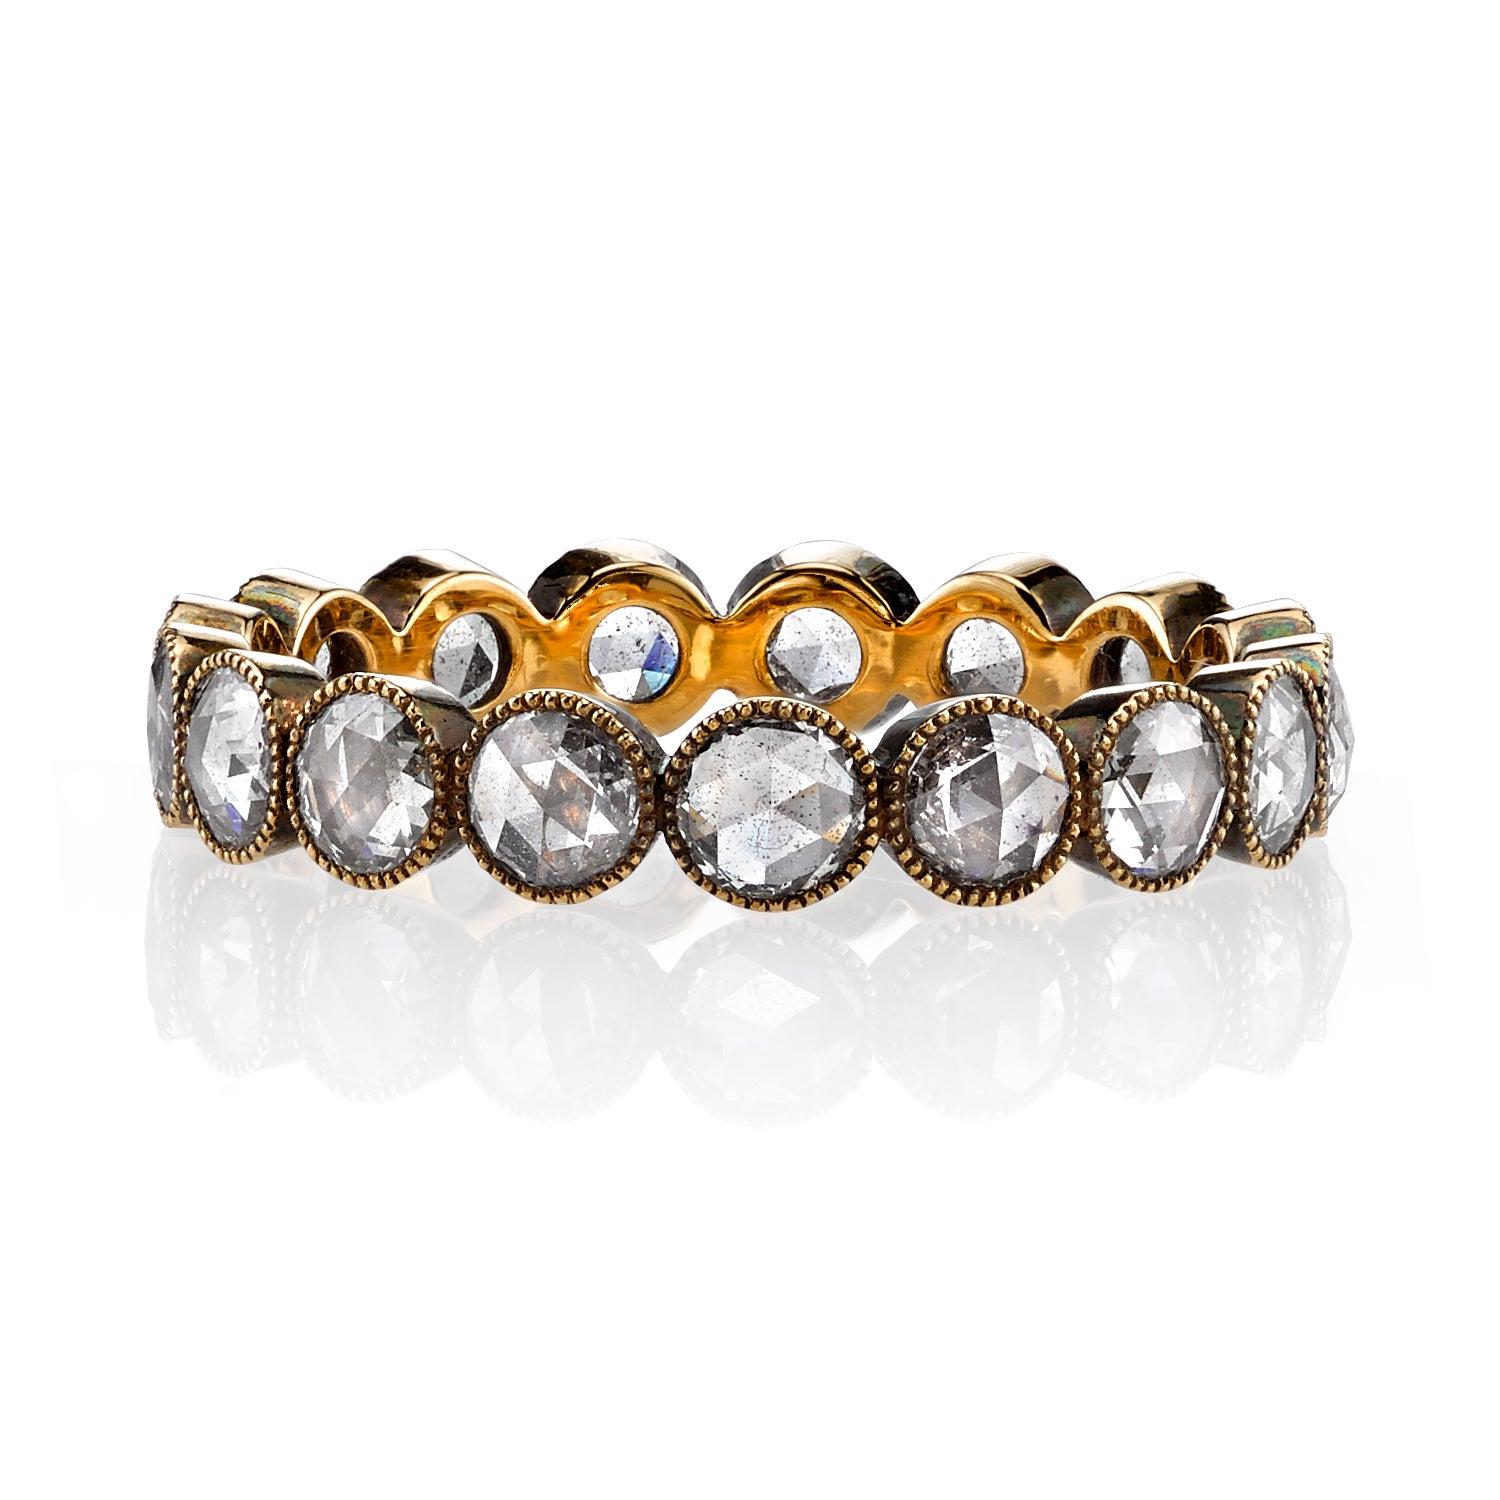 For Sale:  Handcrafted Gabby Rose Cut Diamond Eternity Band by Single Stone 2